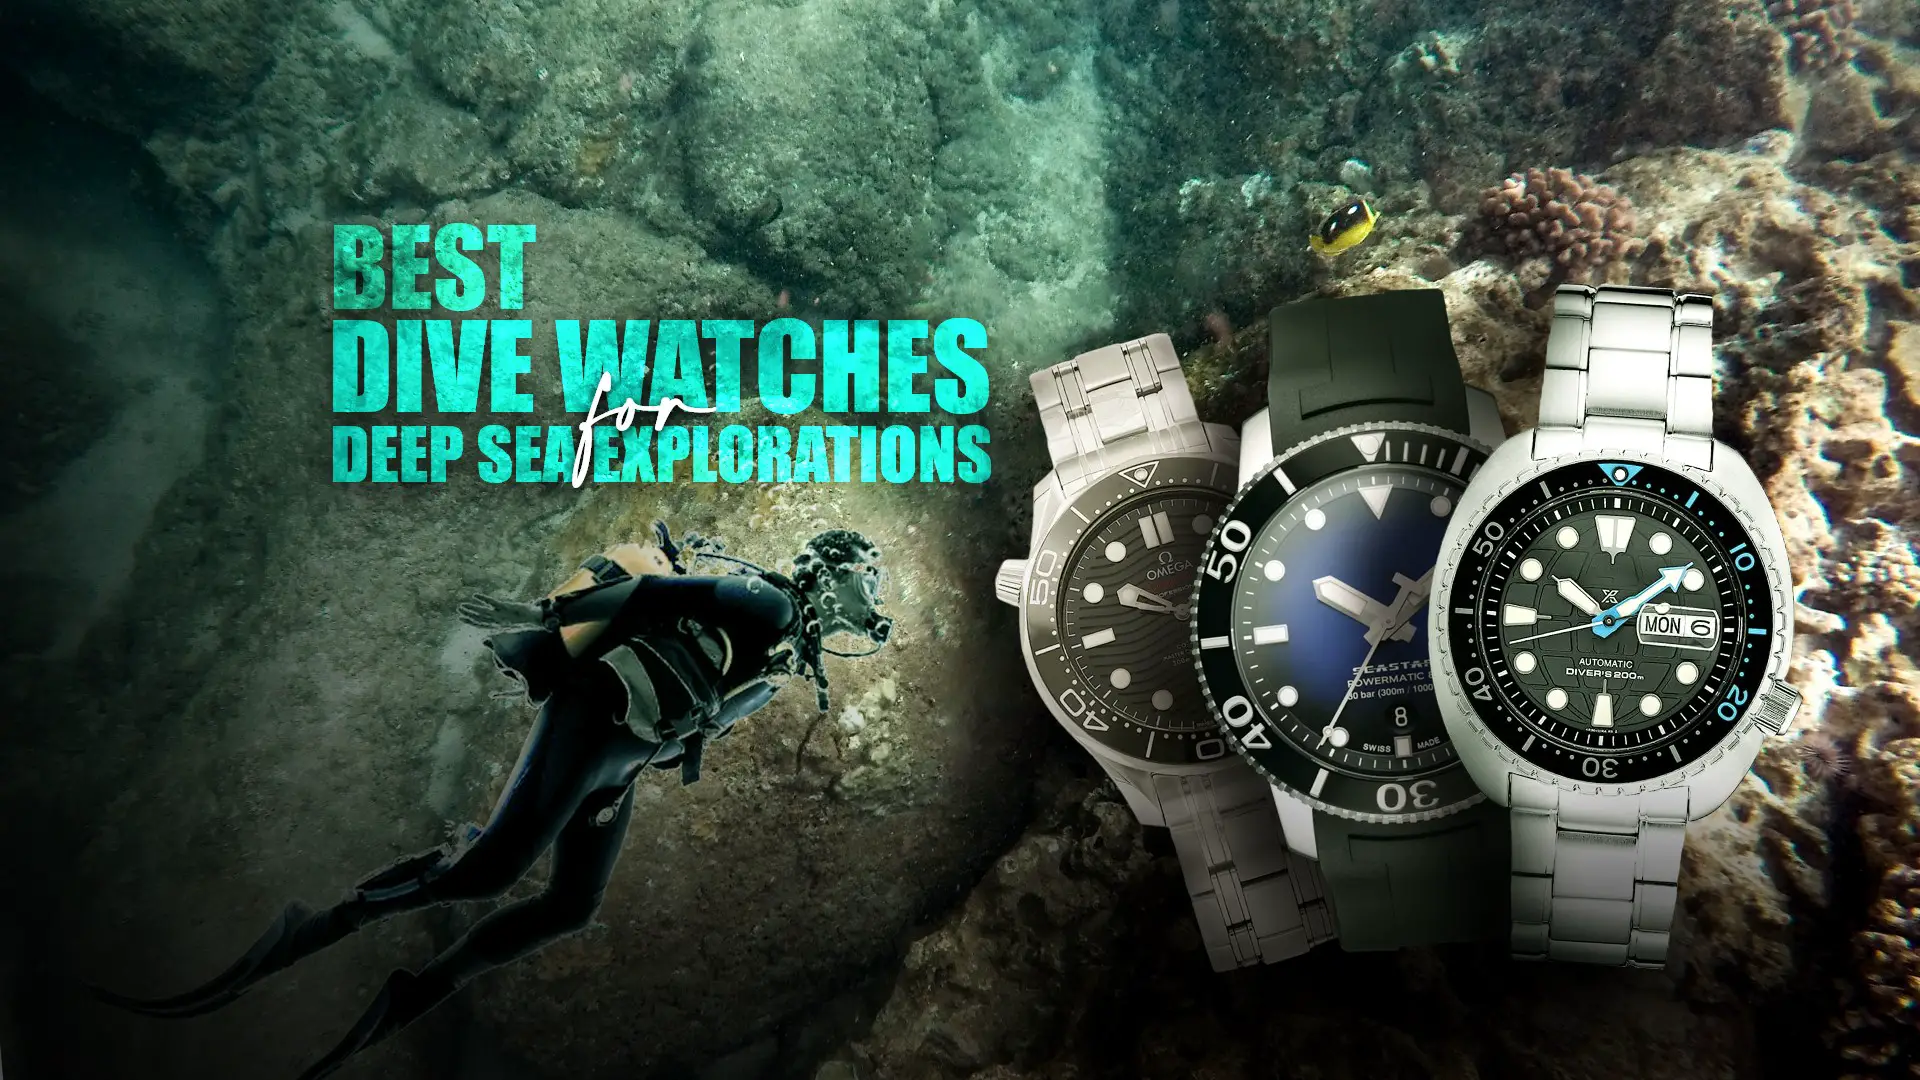 7 Best Dive Watches for Deep Sea Explorations in 2023